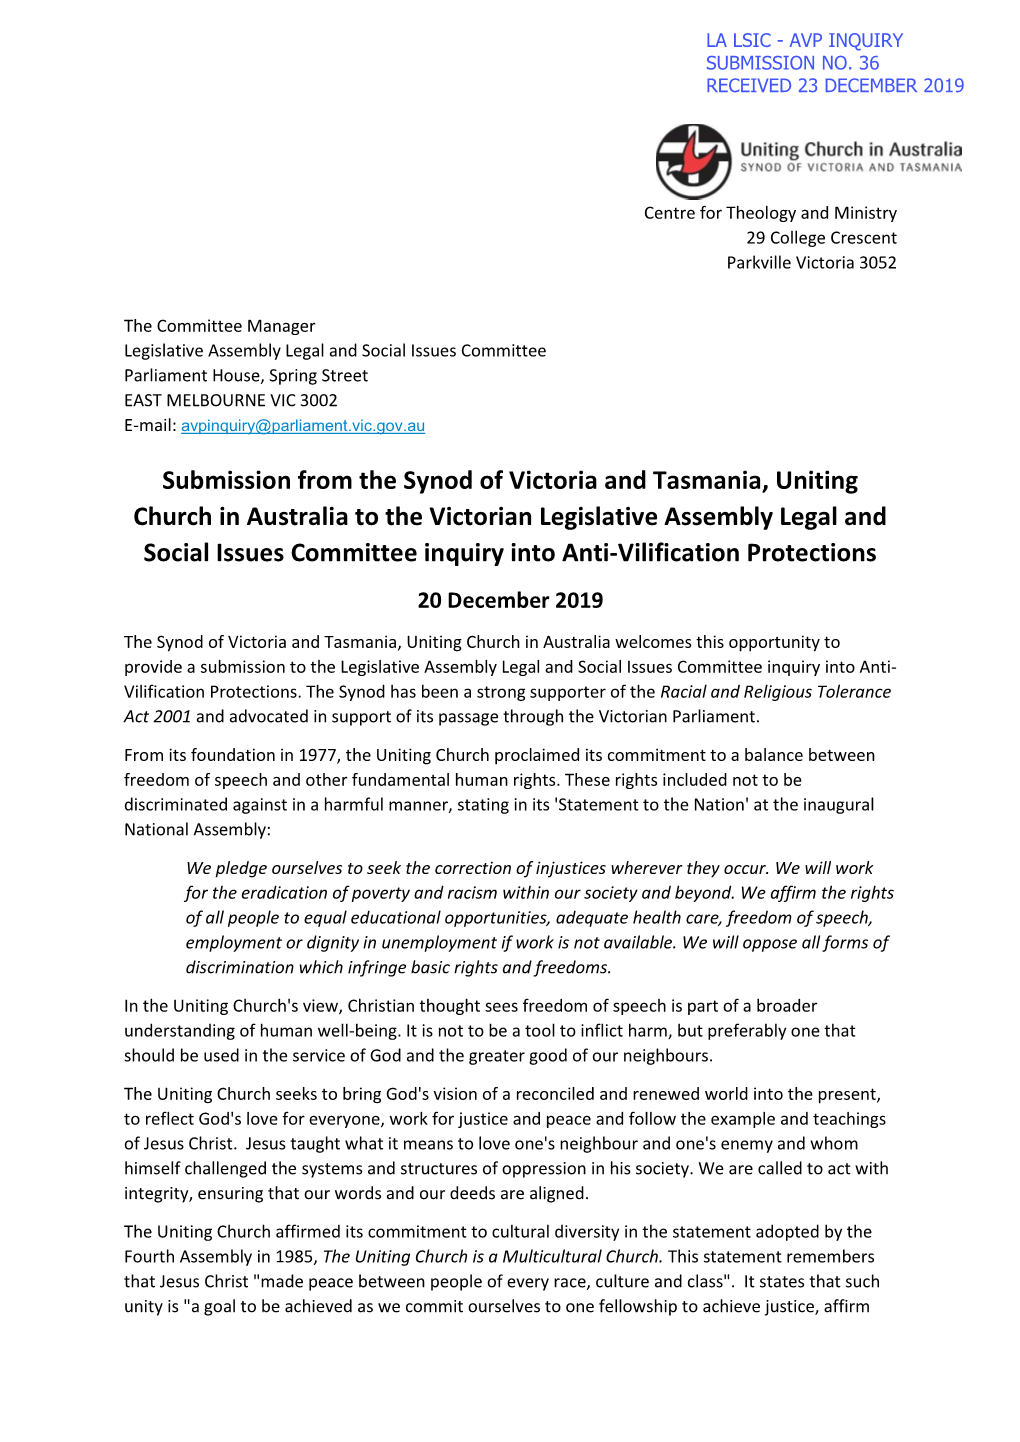 Uniting Church in Australia to the Victorian Legislative Assembly Legal and Social Issues Committee Inquiry Into Anti-Vilification Protections 20 December 2019